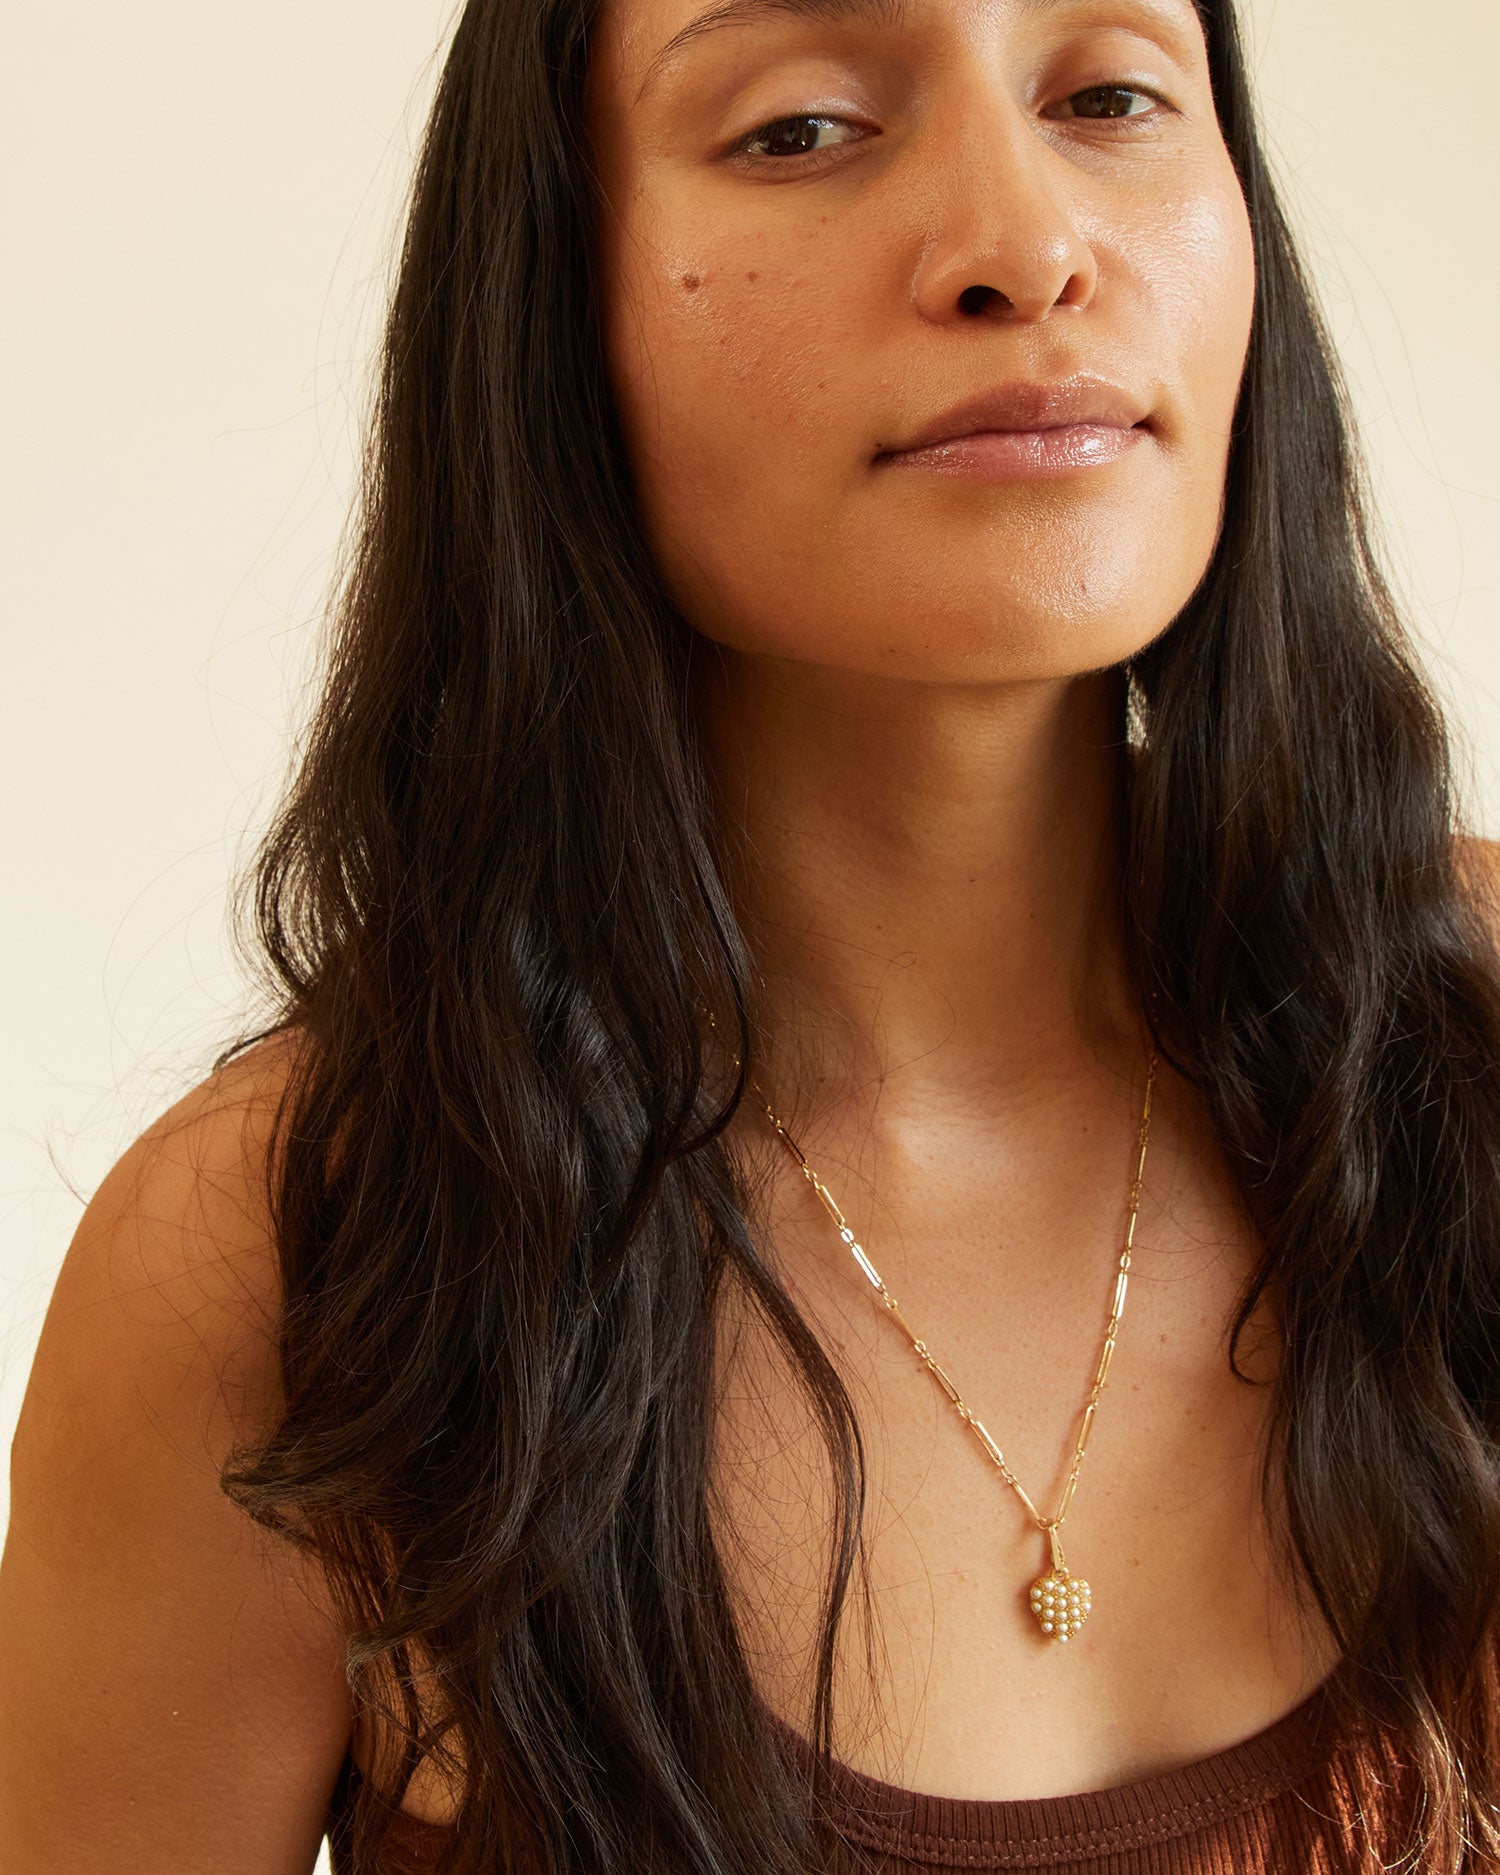 Andrea wears the encrusted pearl heart charm on the paperclip necklace